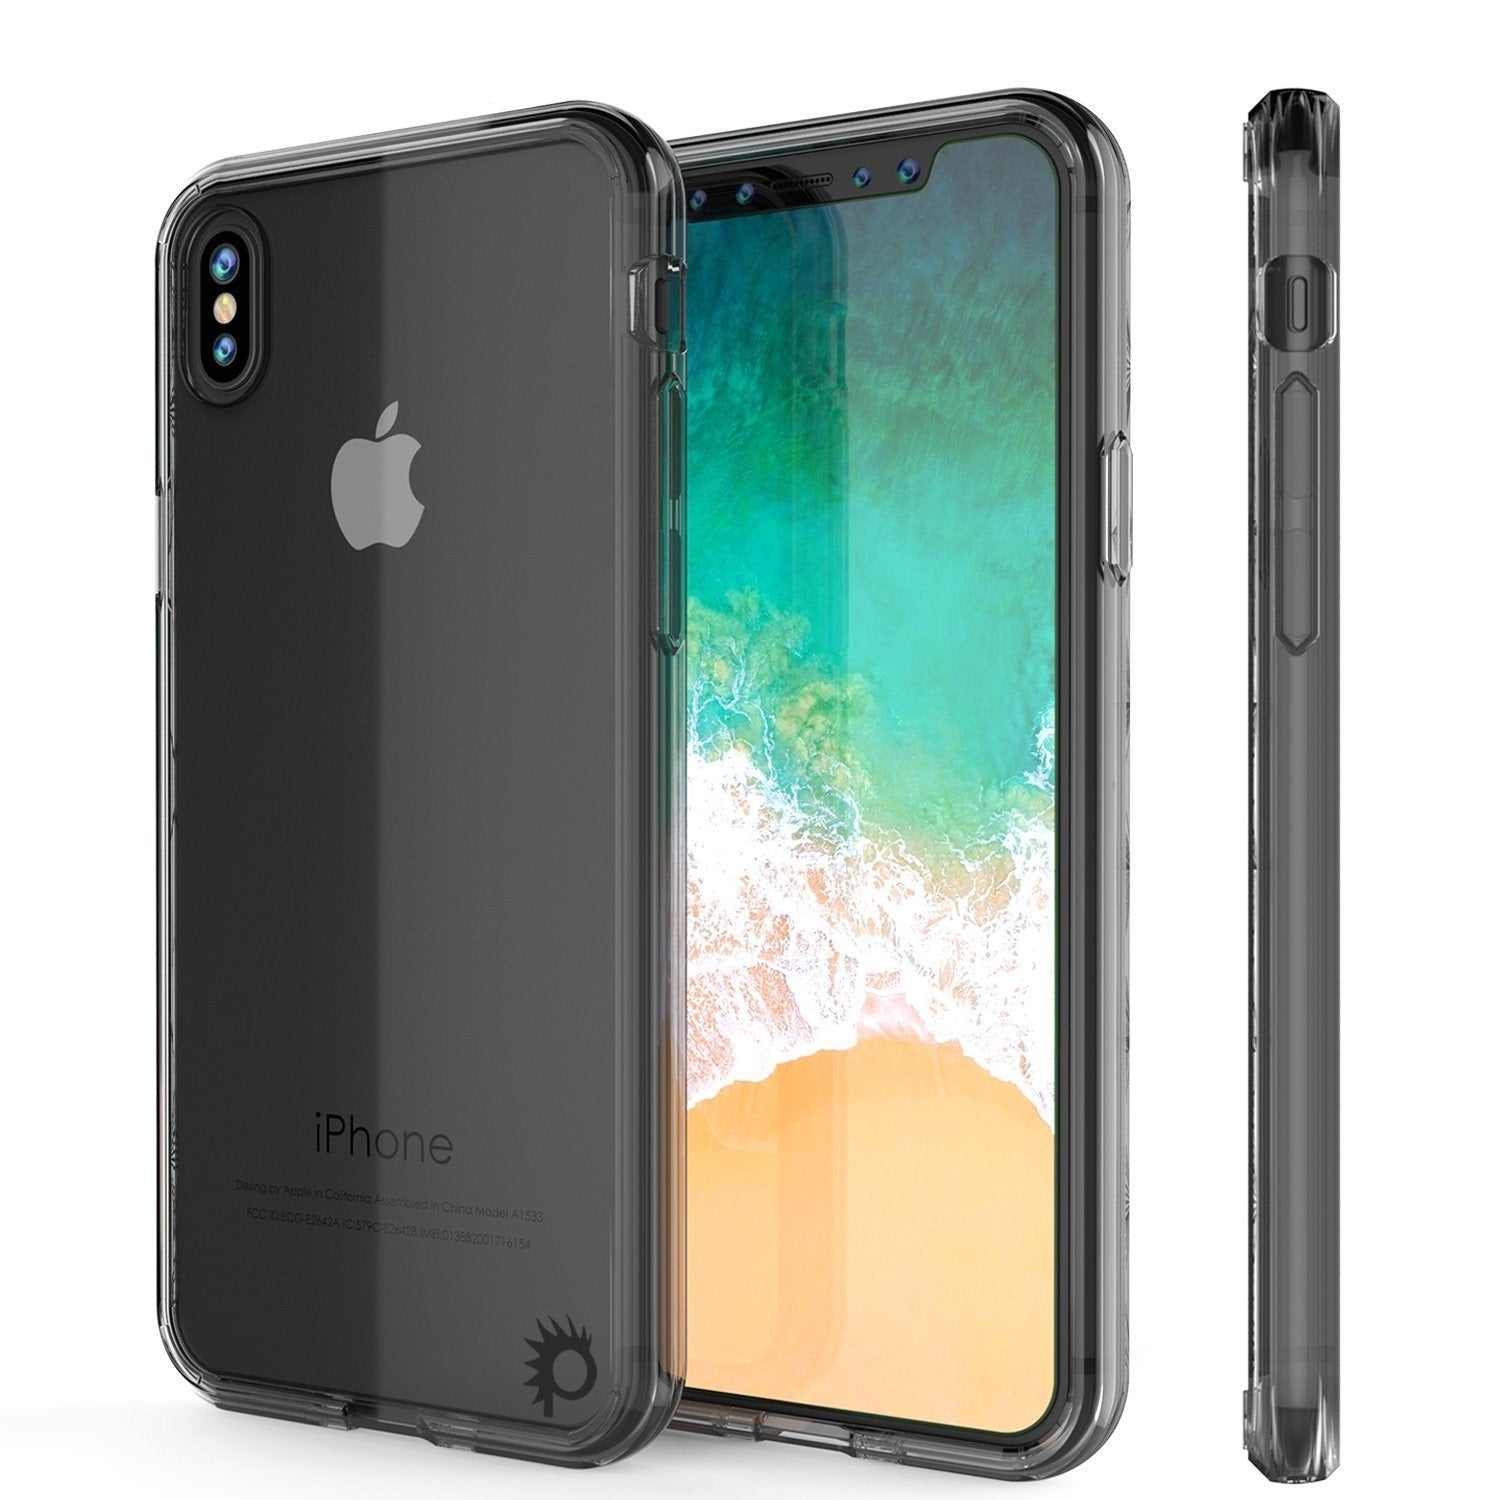 iPhone XS Max Case, PUNKcase [Lucid 2.0 Series] [Slim Fit] Armor Cover [Crystal-Black]